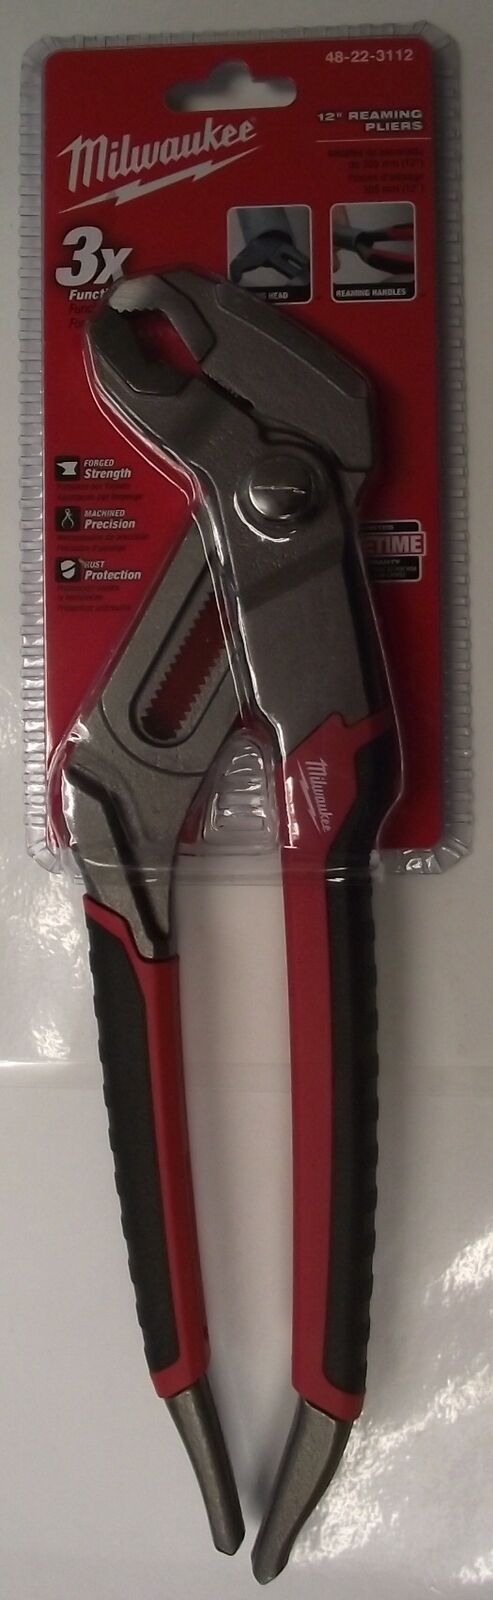 Milwaukee 48-22-3112 12" Reaming Groove Joint Pliers